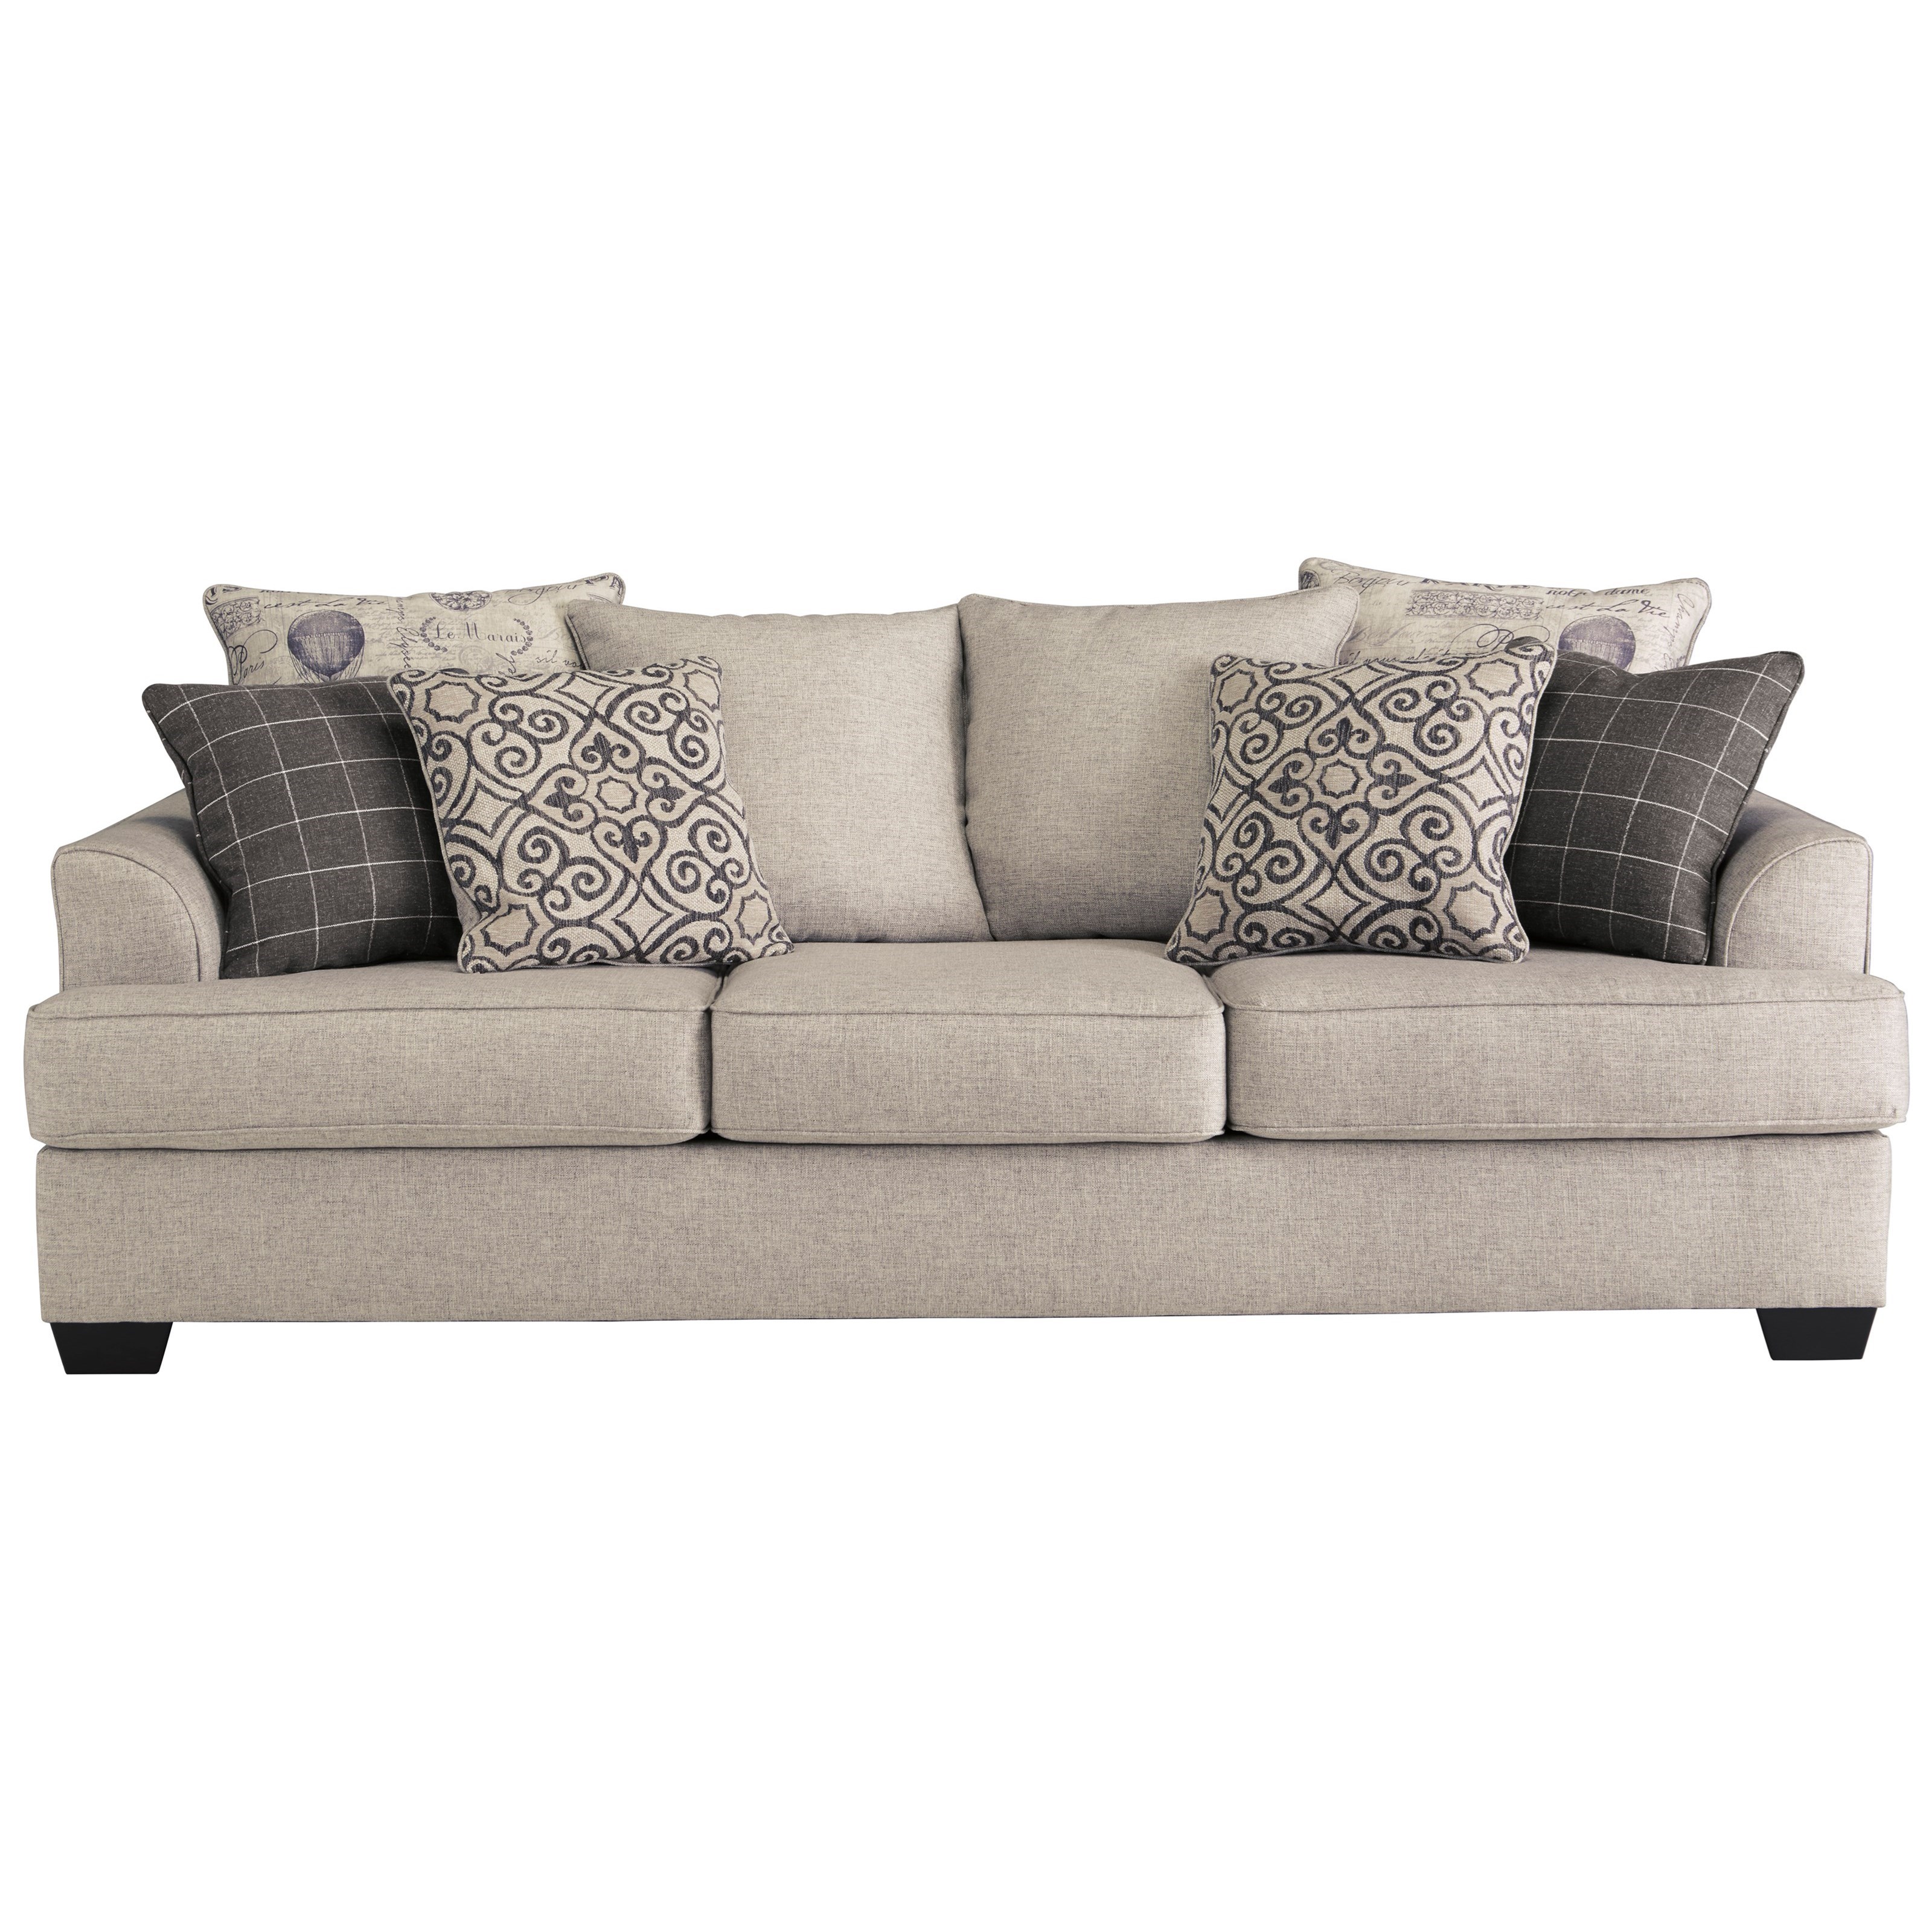 couch with decorative pillows